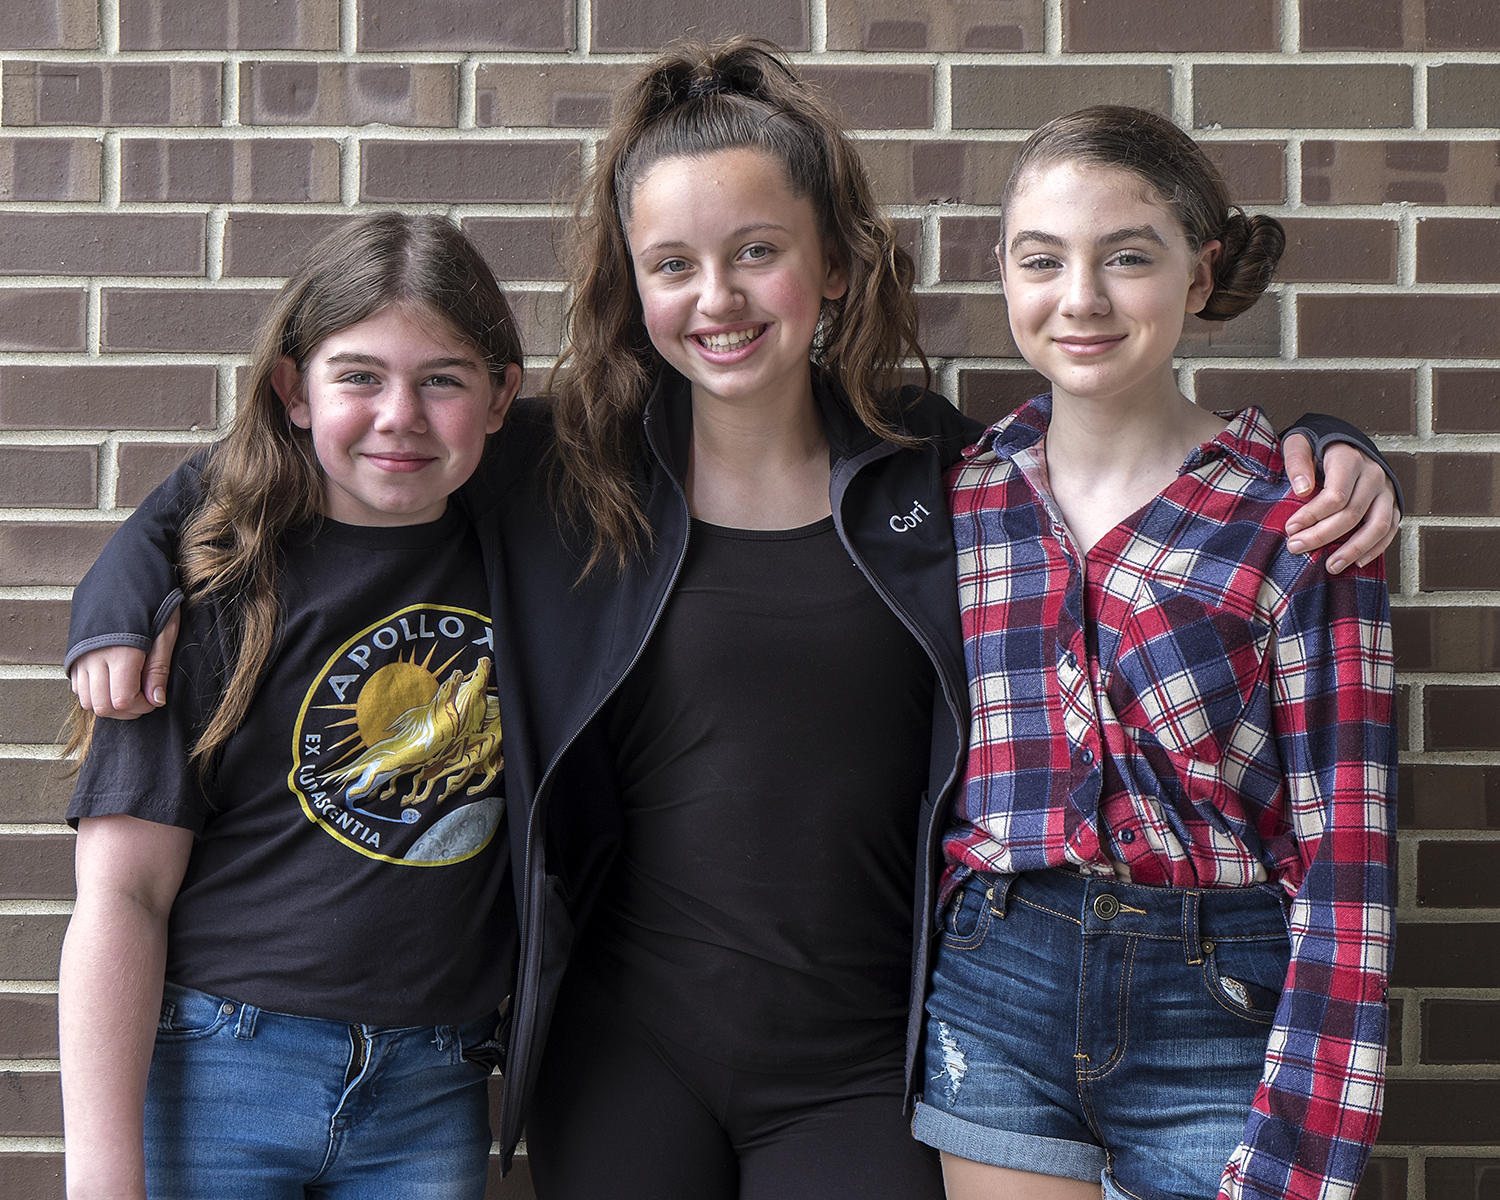 Sisters and Friend after Dance Competition, Norwell, Massachusetts<p><a class="nav-link" href="/content.html?page=6/#TA58" target="_top">Thumbnail</a>